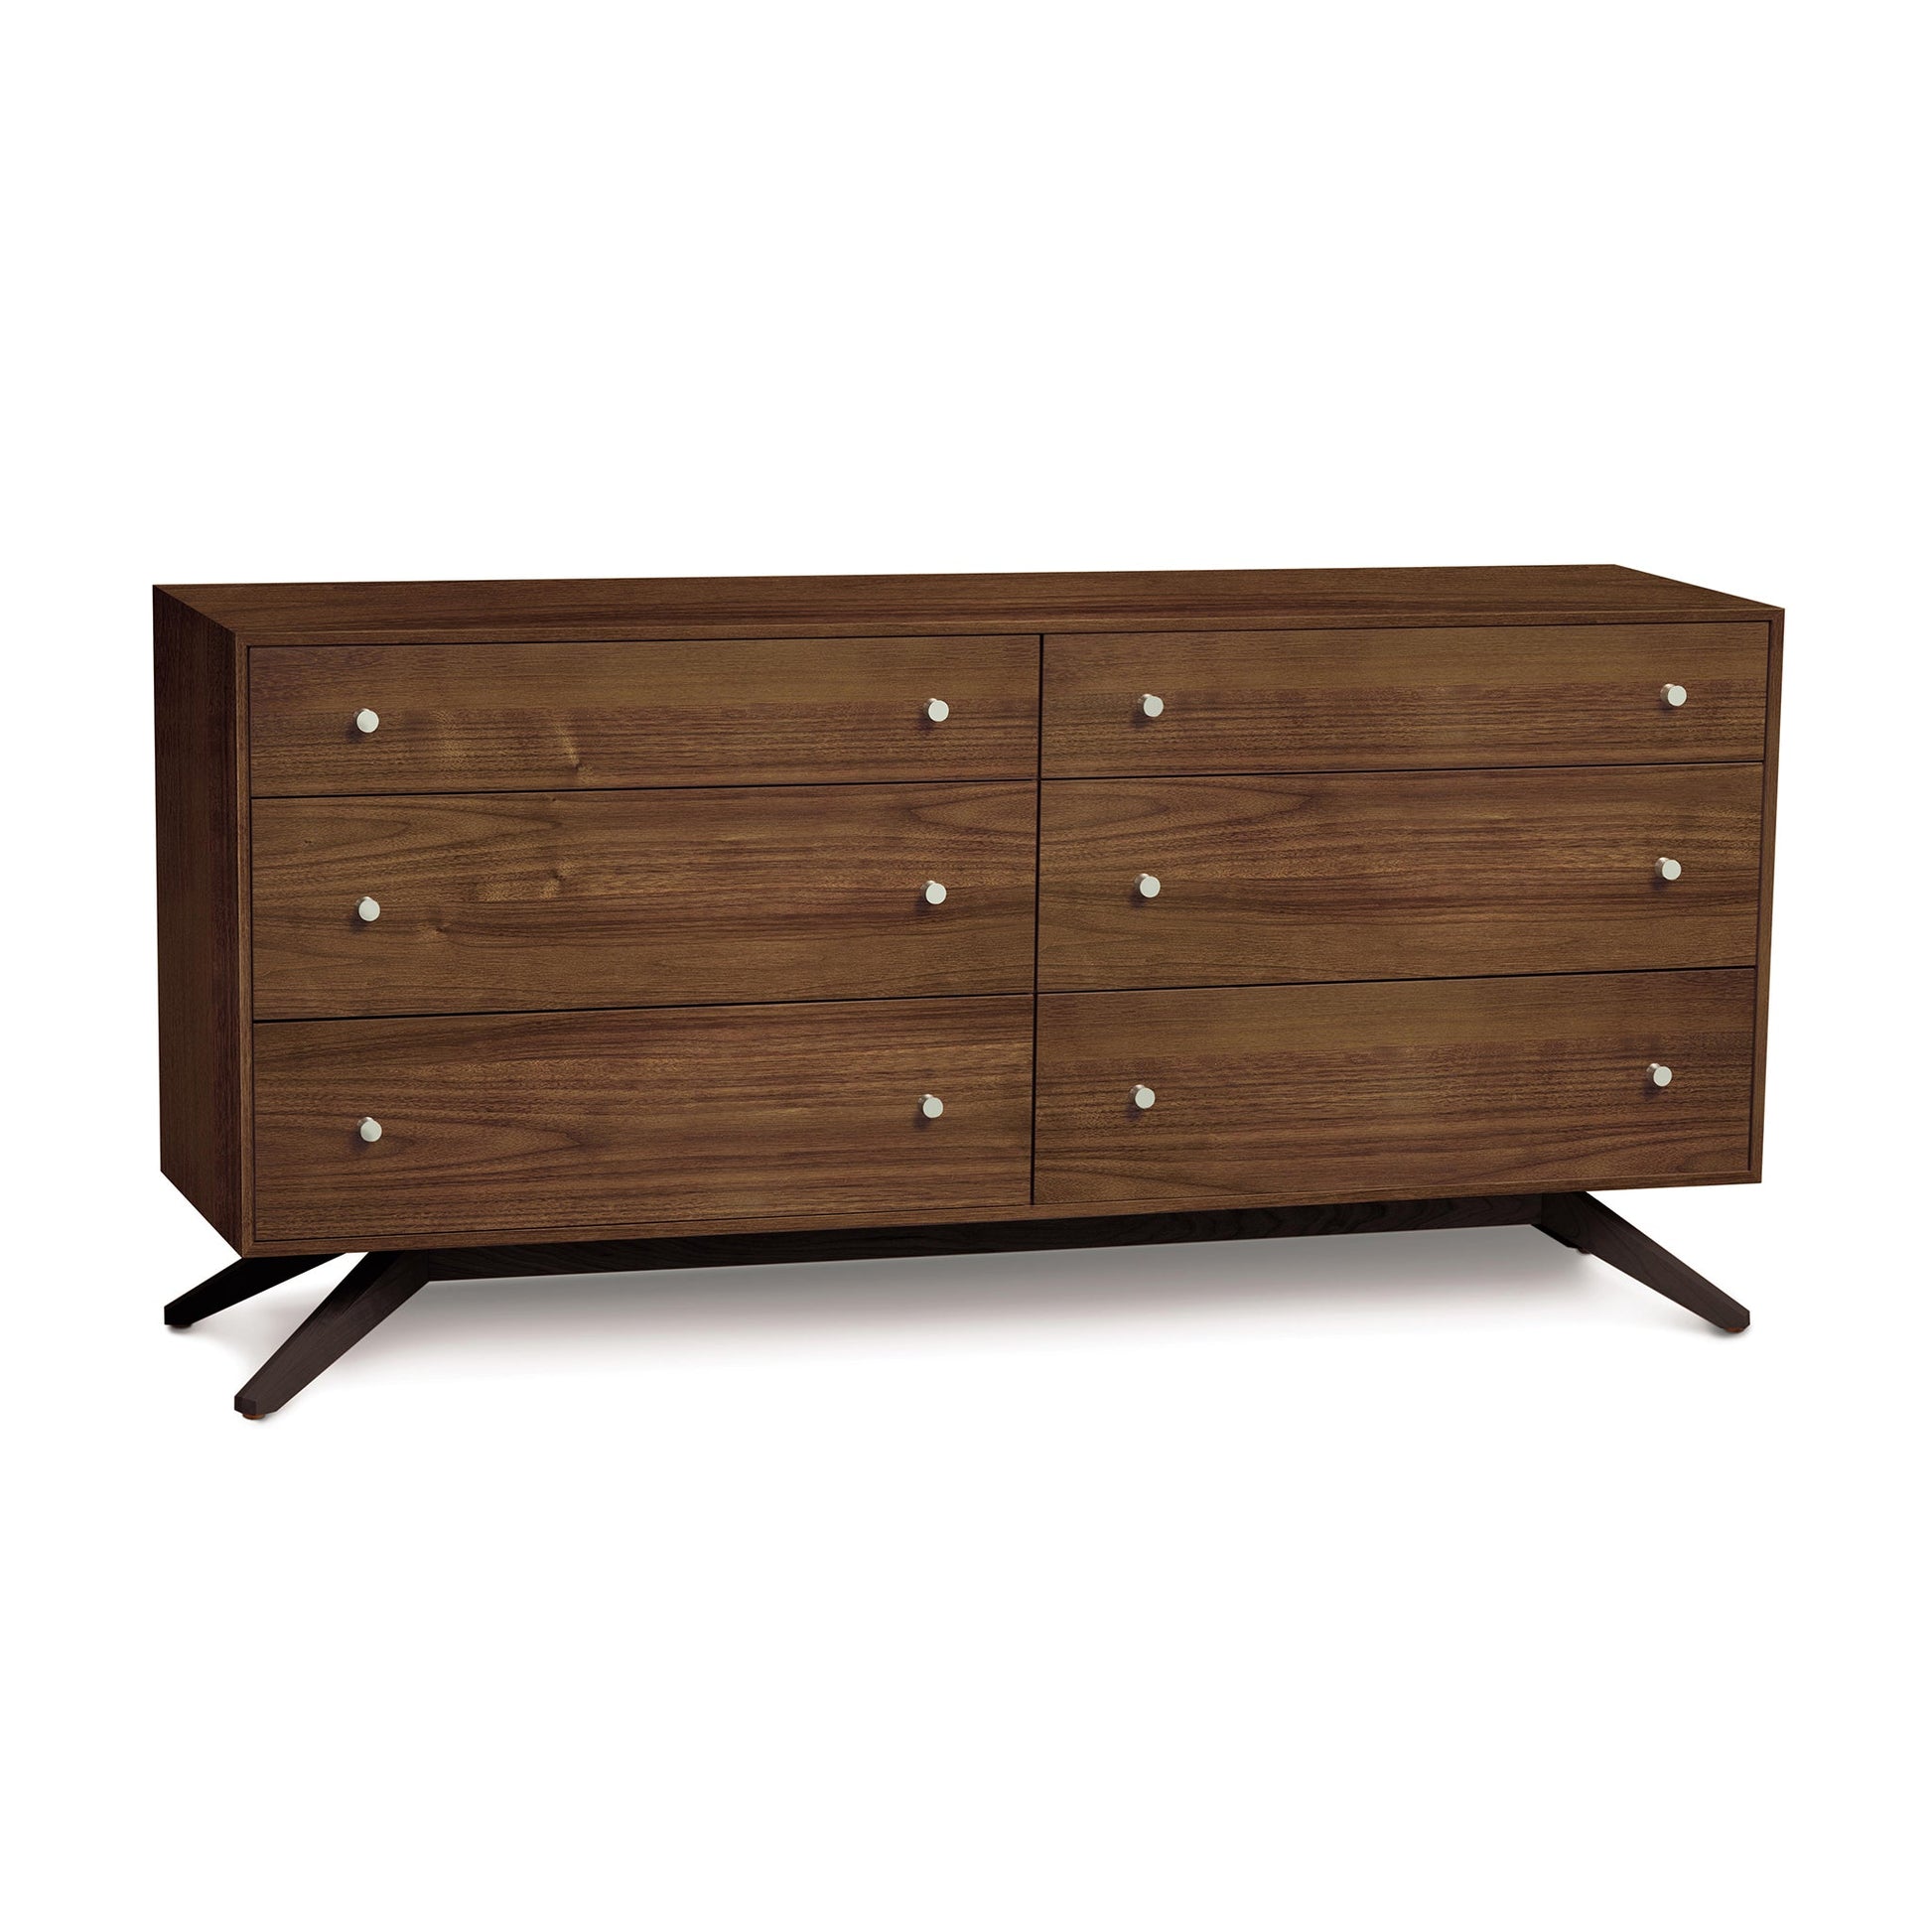 A modern dresser with drawers on a white background.